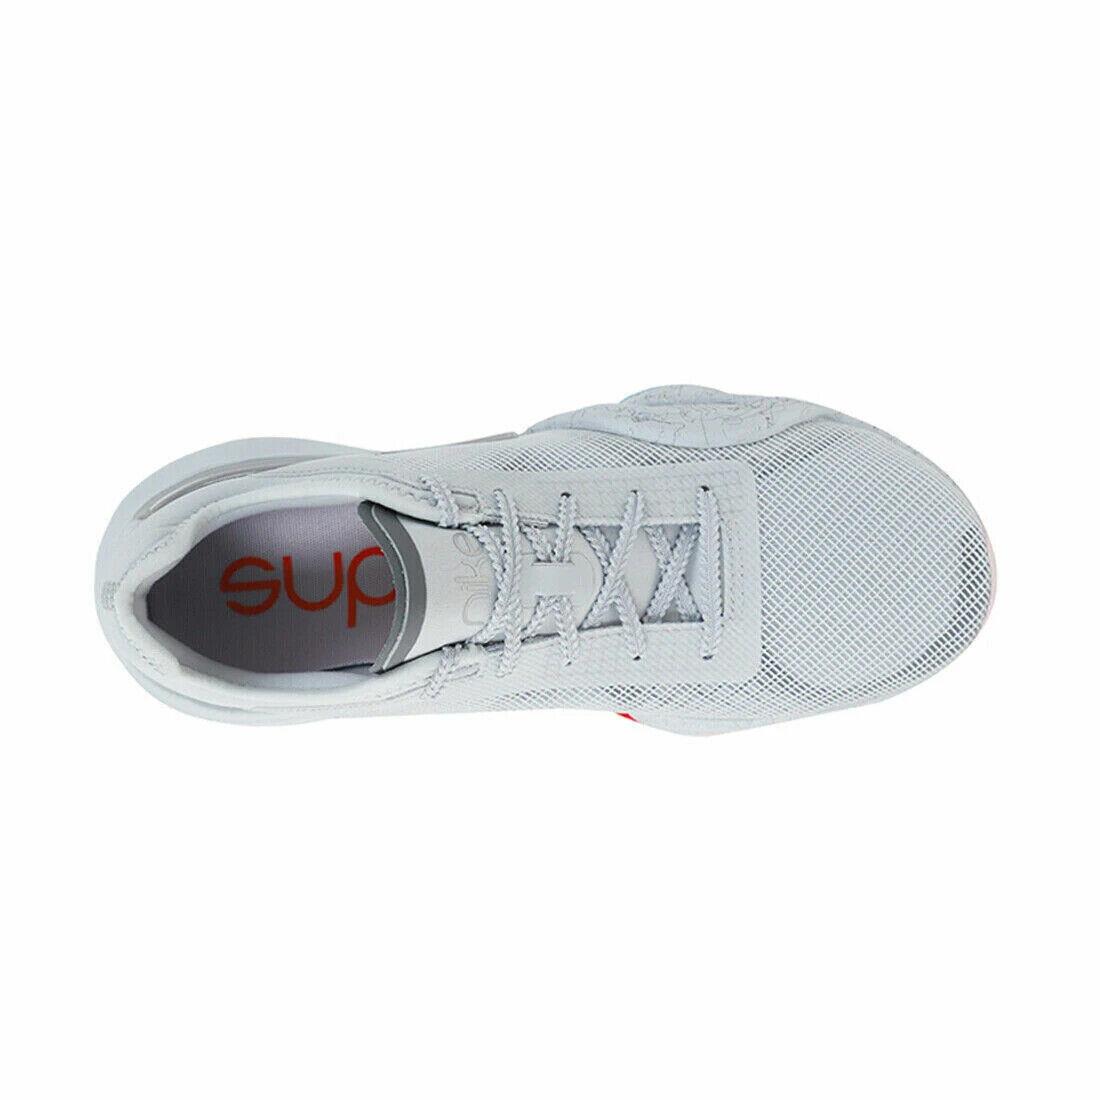 Nike shoes Superrep - Pure Platinum & Silver 3